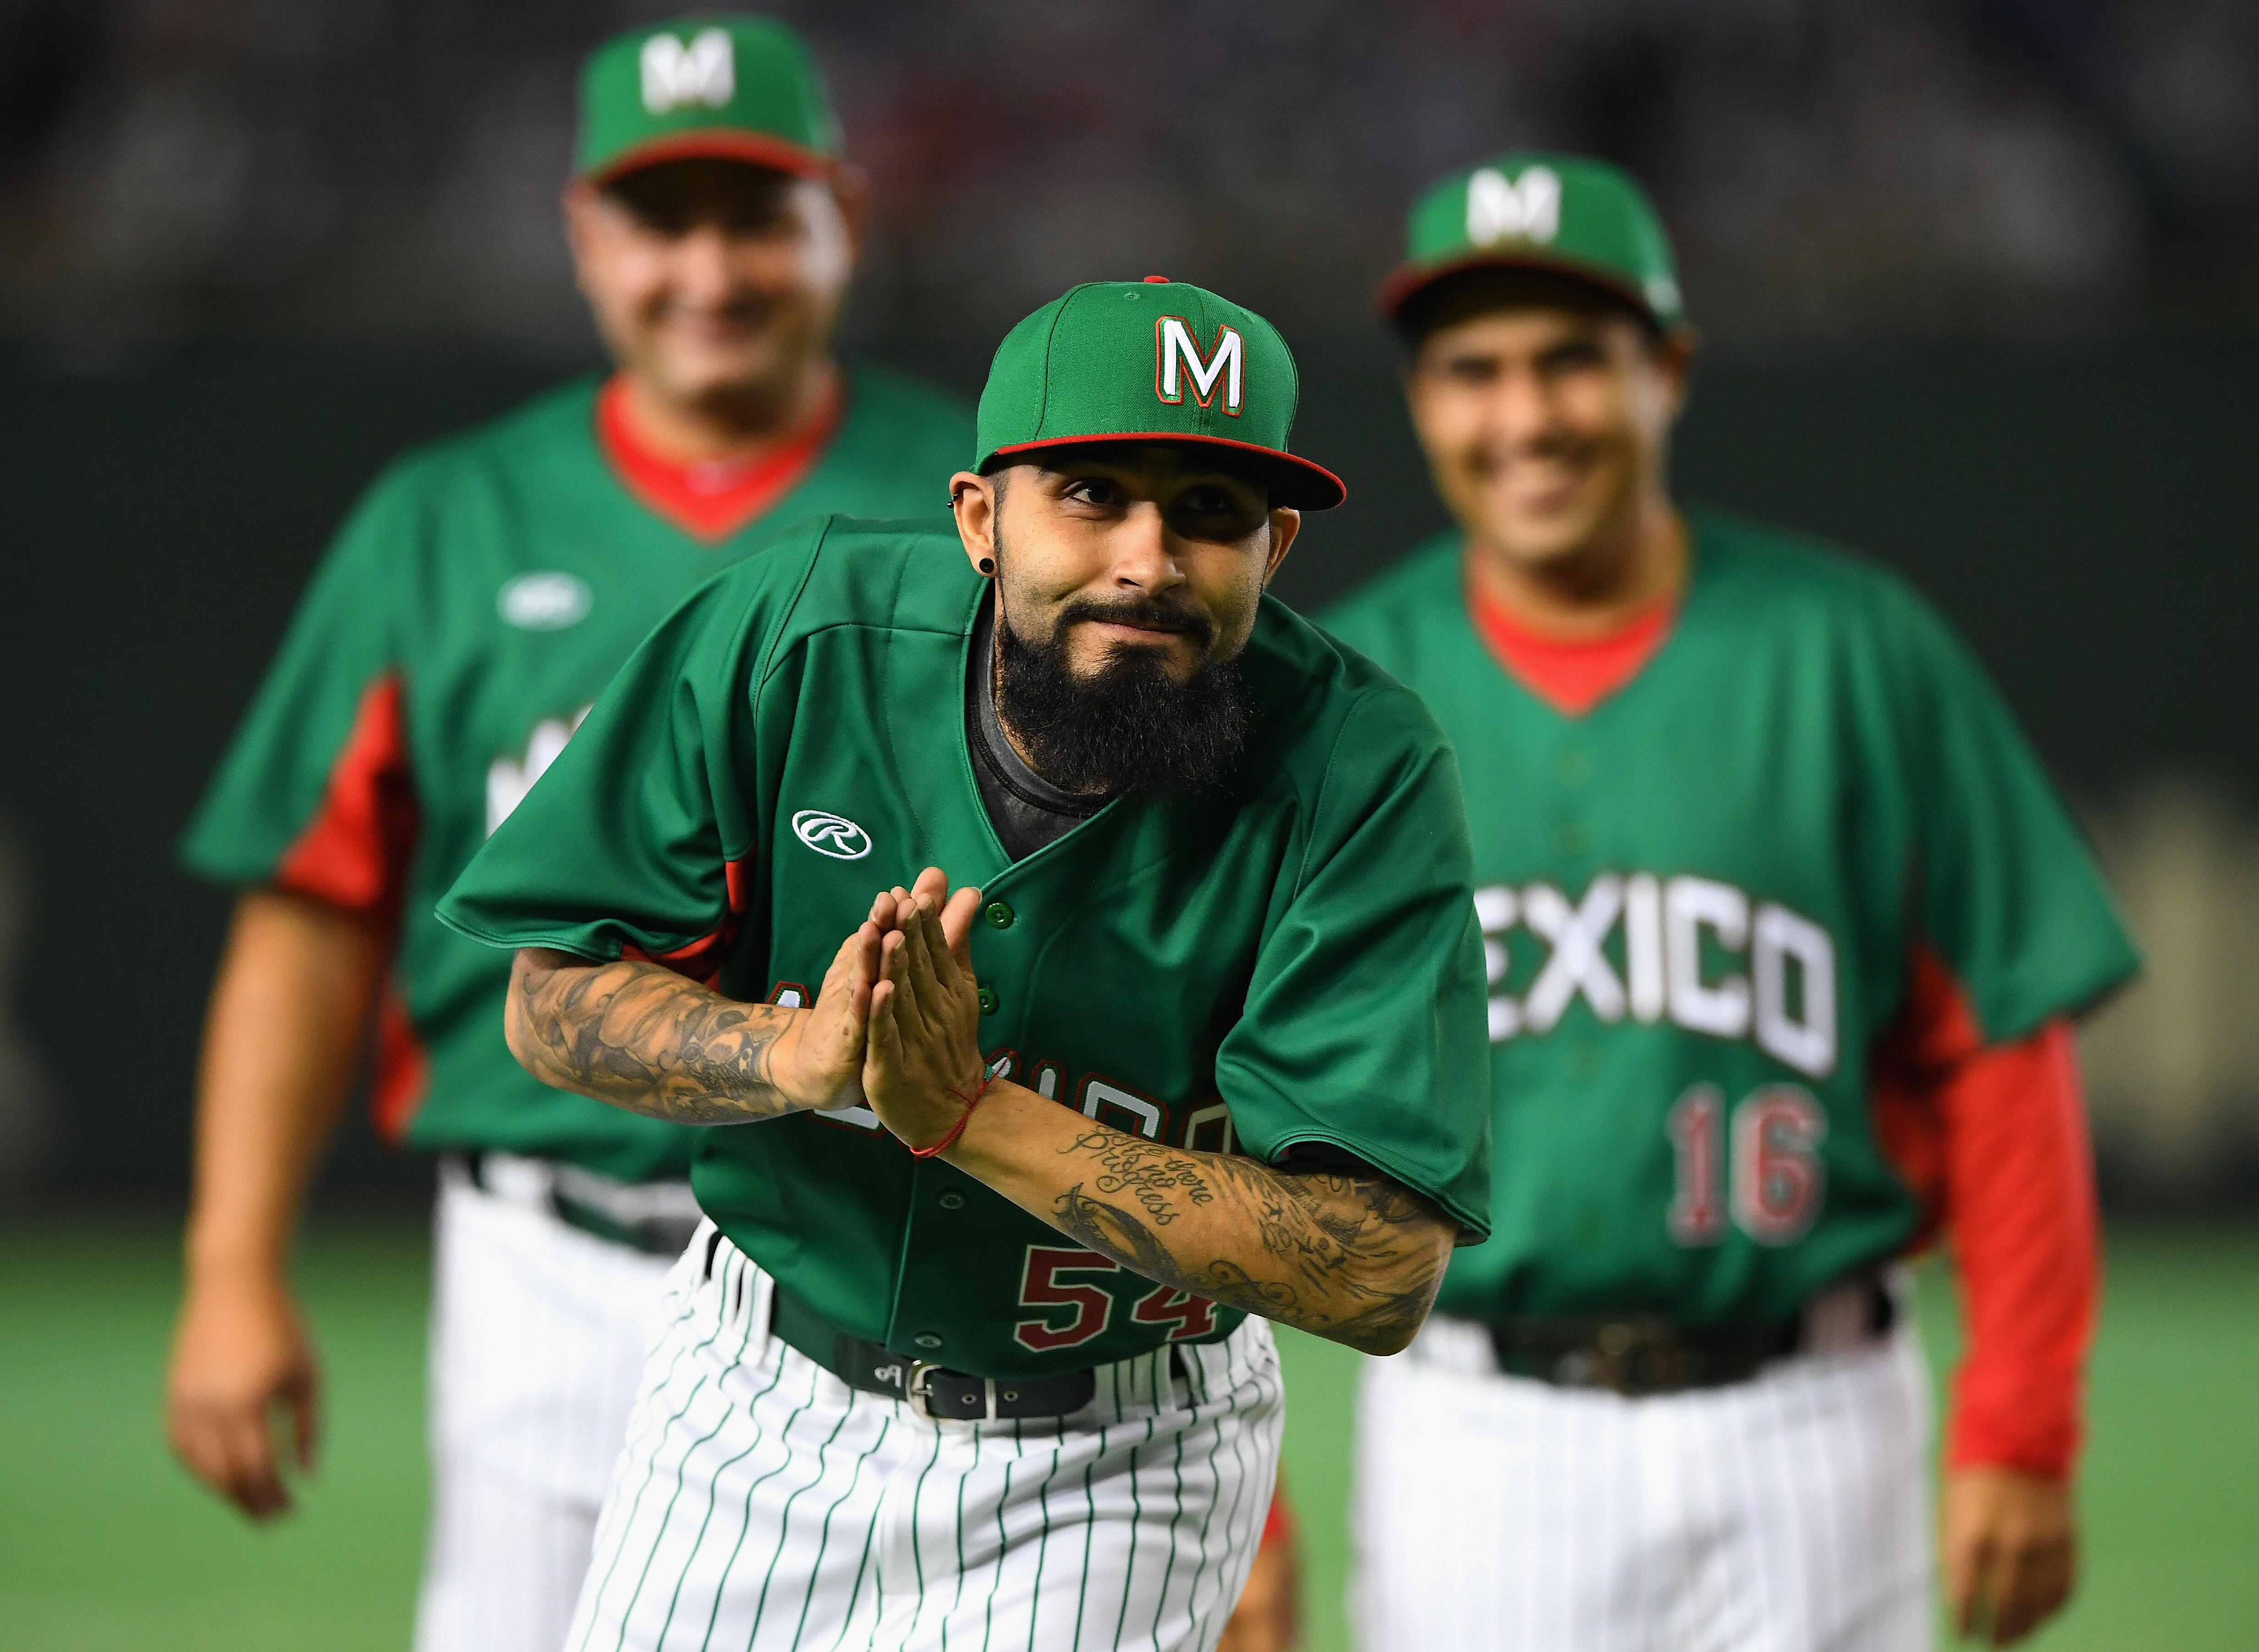 TOKYO, JAPAN - NOVEMBER 10:  Pitcher Sergio Romo #54 of Mexico is introduced prior to the international friendly match between Japan and Mexico at the Tokyo Dome on November 10, 2016 in Tokyo, Japan.  (Photo by Masterpress/Getty Images)